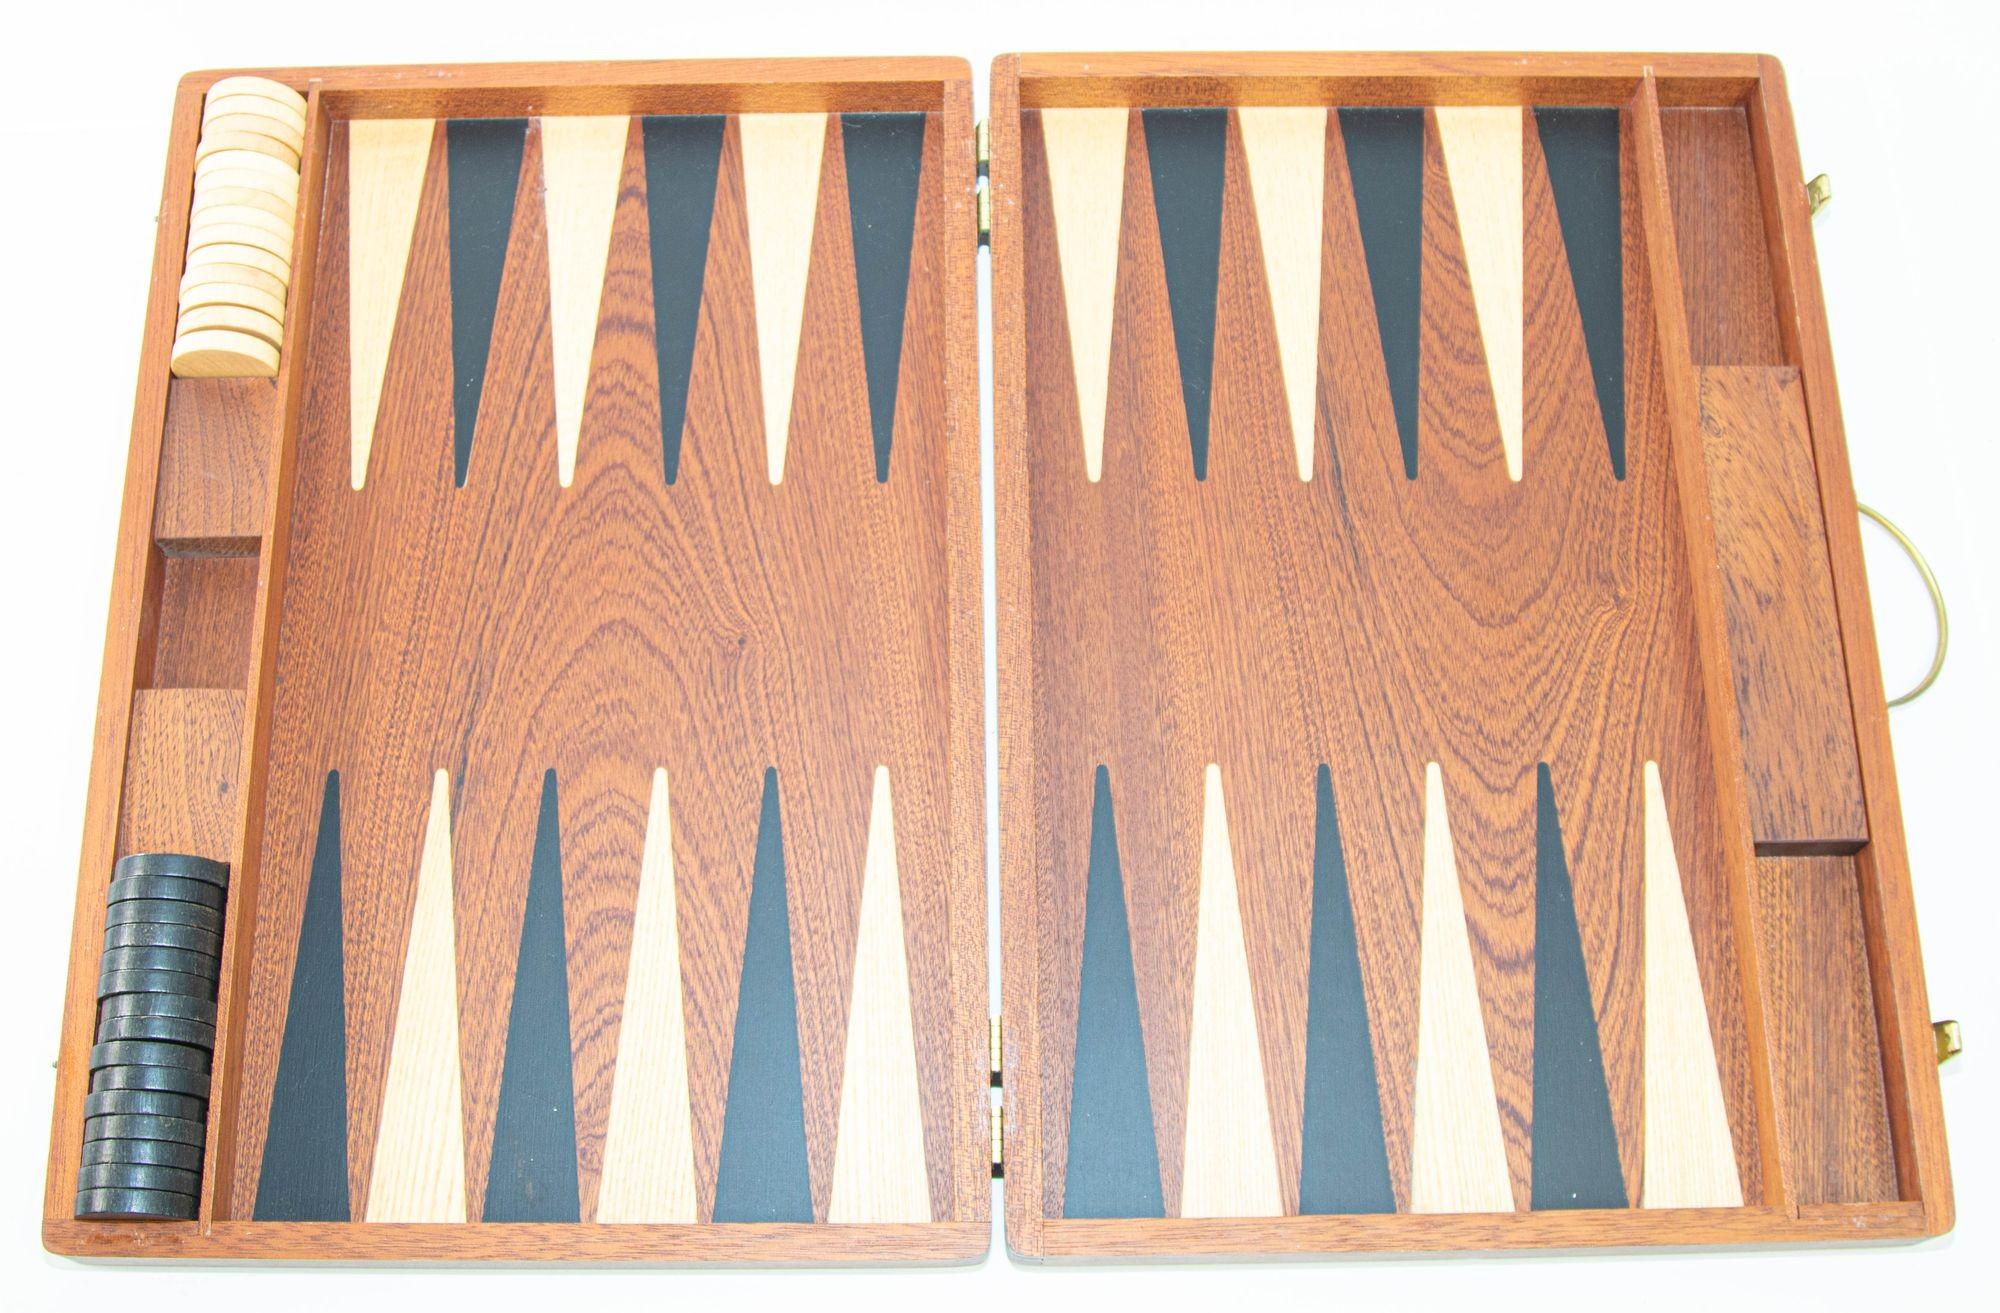 Vintage Wood Backgammon Set Game Box, circa 1950
Vintage oak wood backgammon game set in case.
Large handcrafted portable wooded backgammon board game set with wooden playing pieces.
Beautiful natural oiled wood backgammon with an elegant